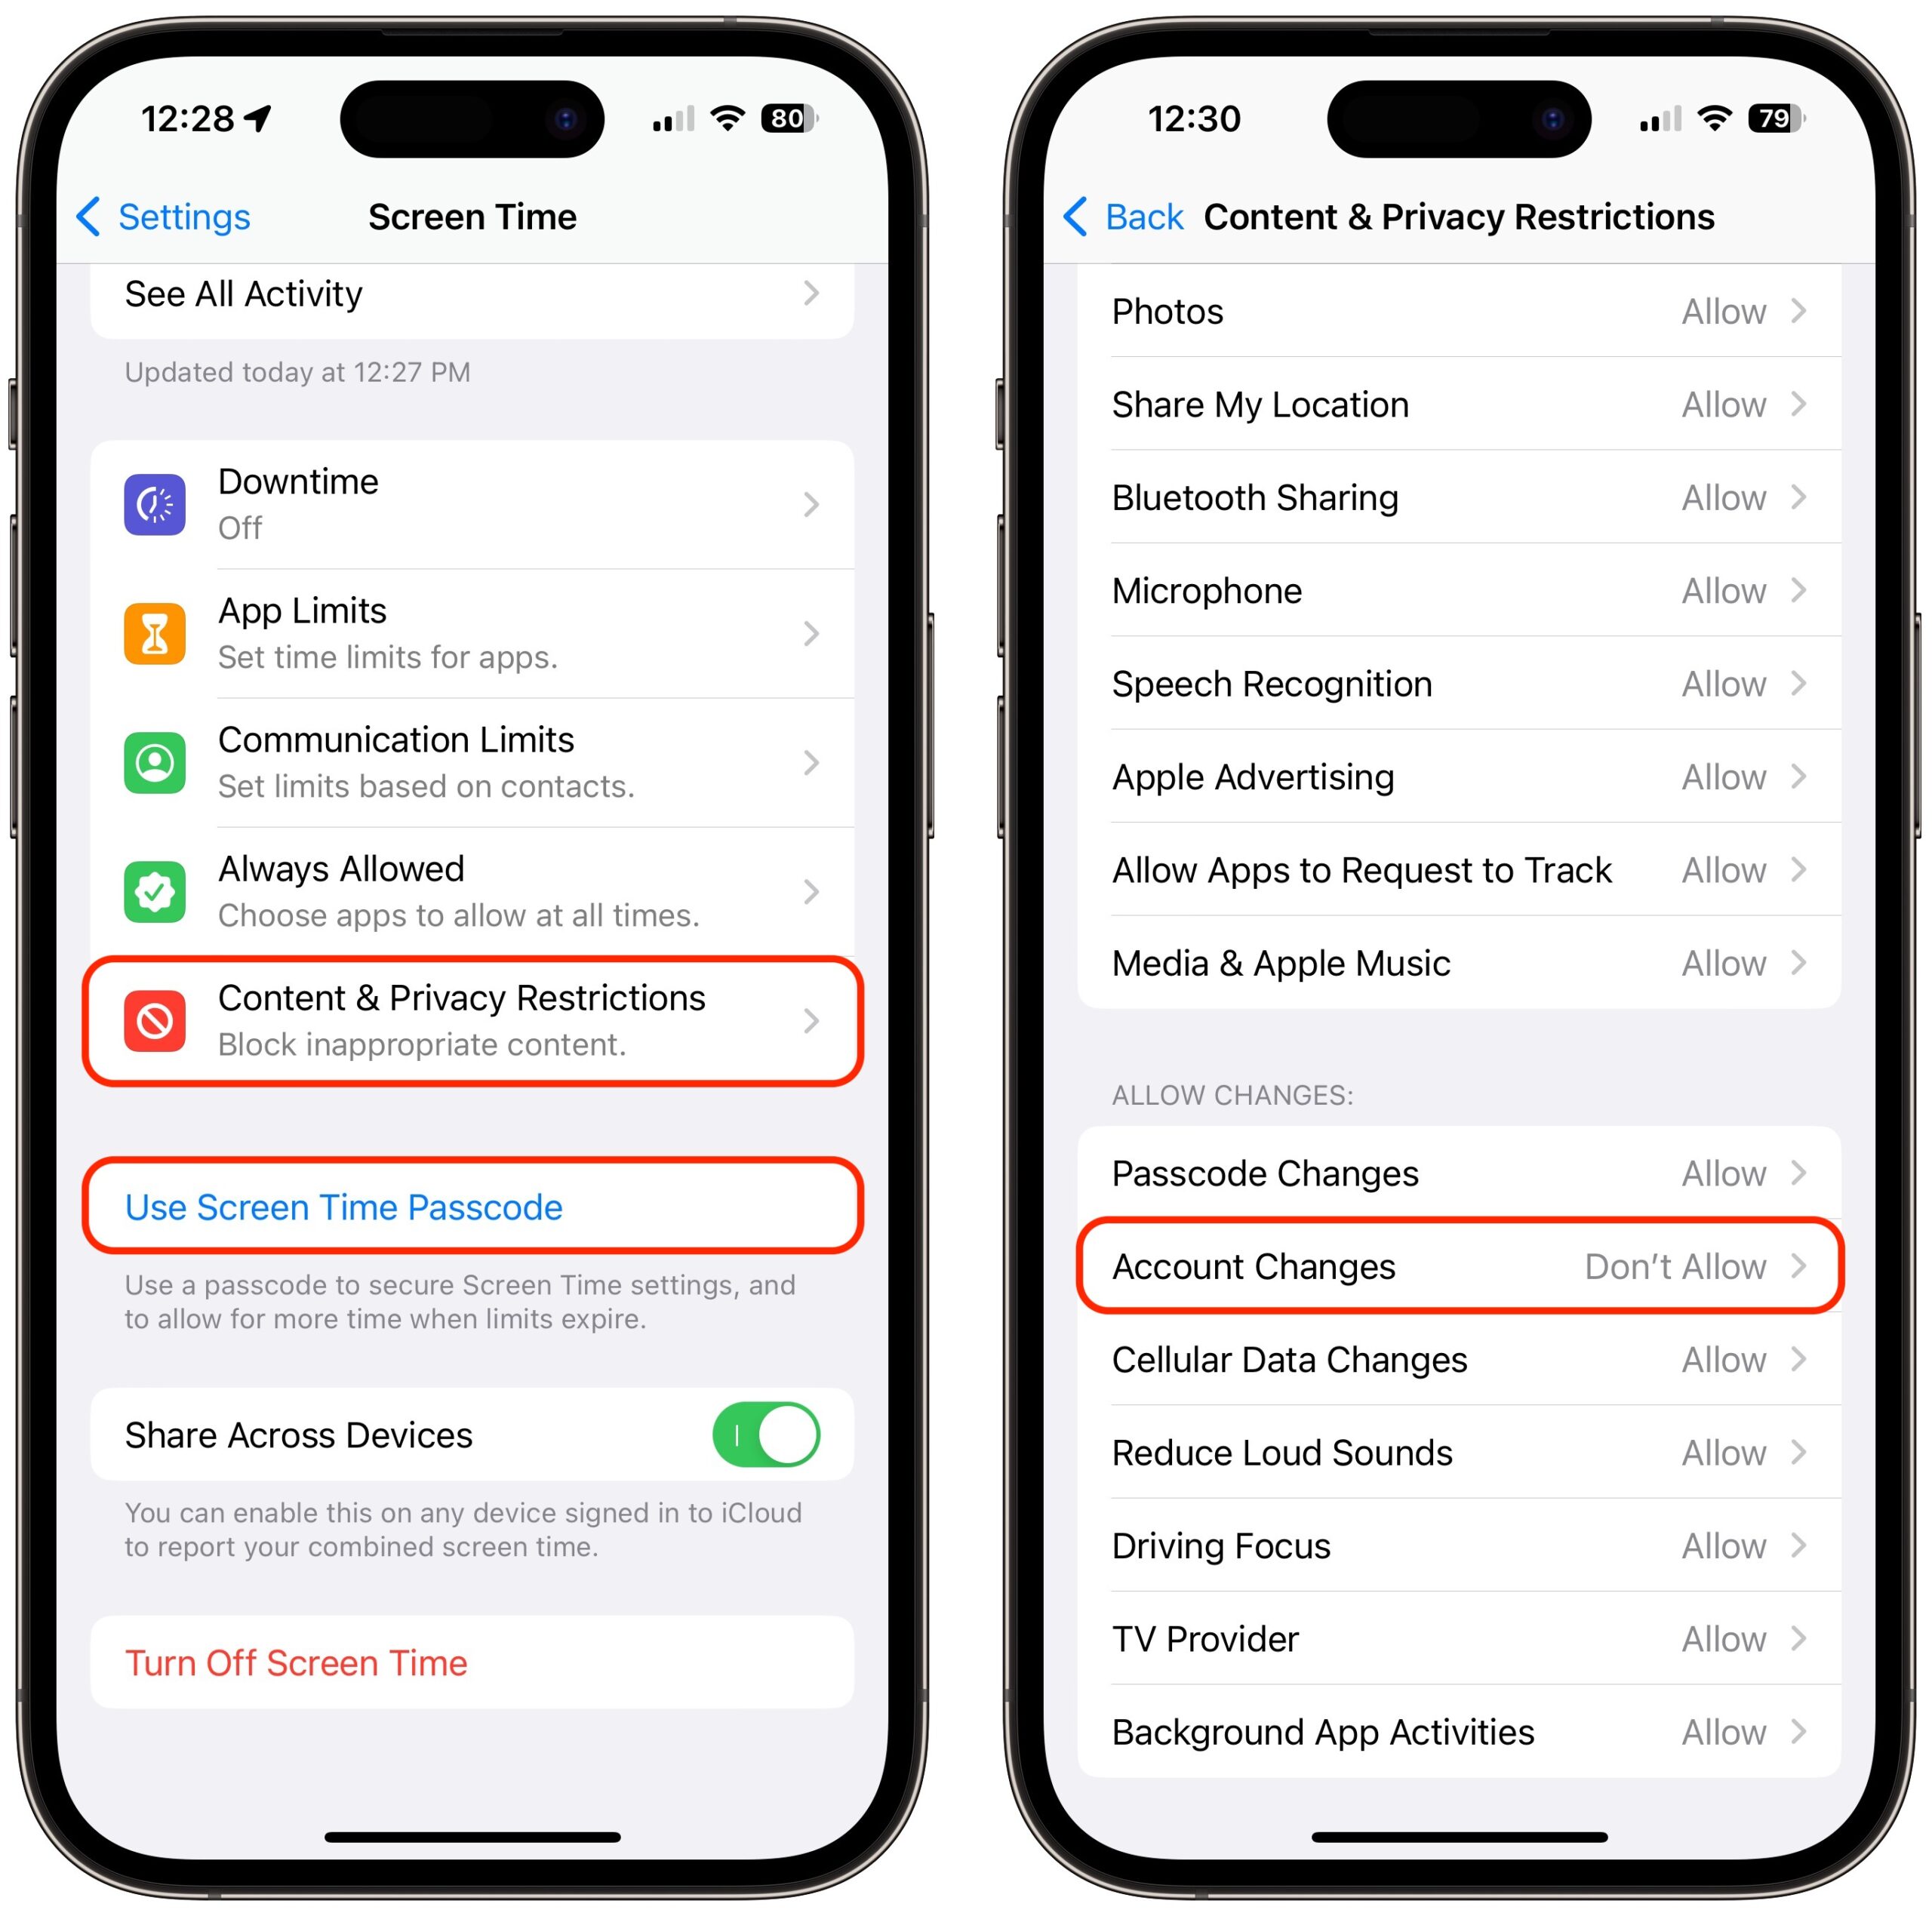 Screen Time passcode protection from account changes